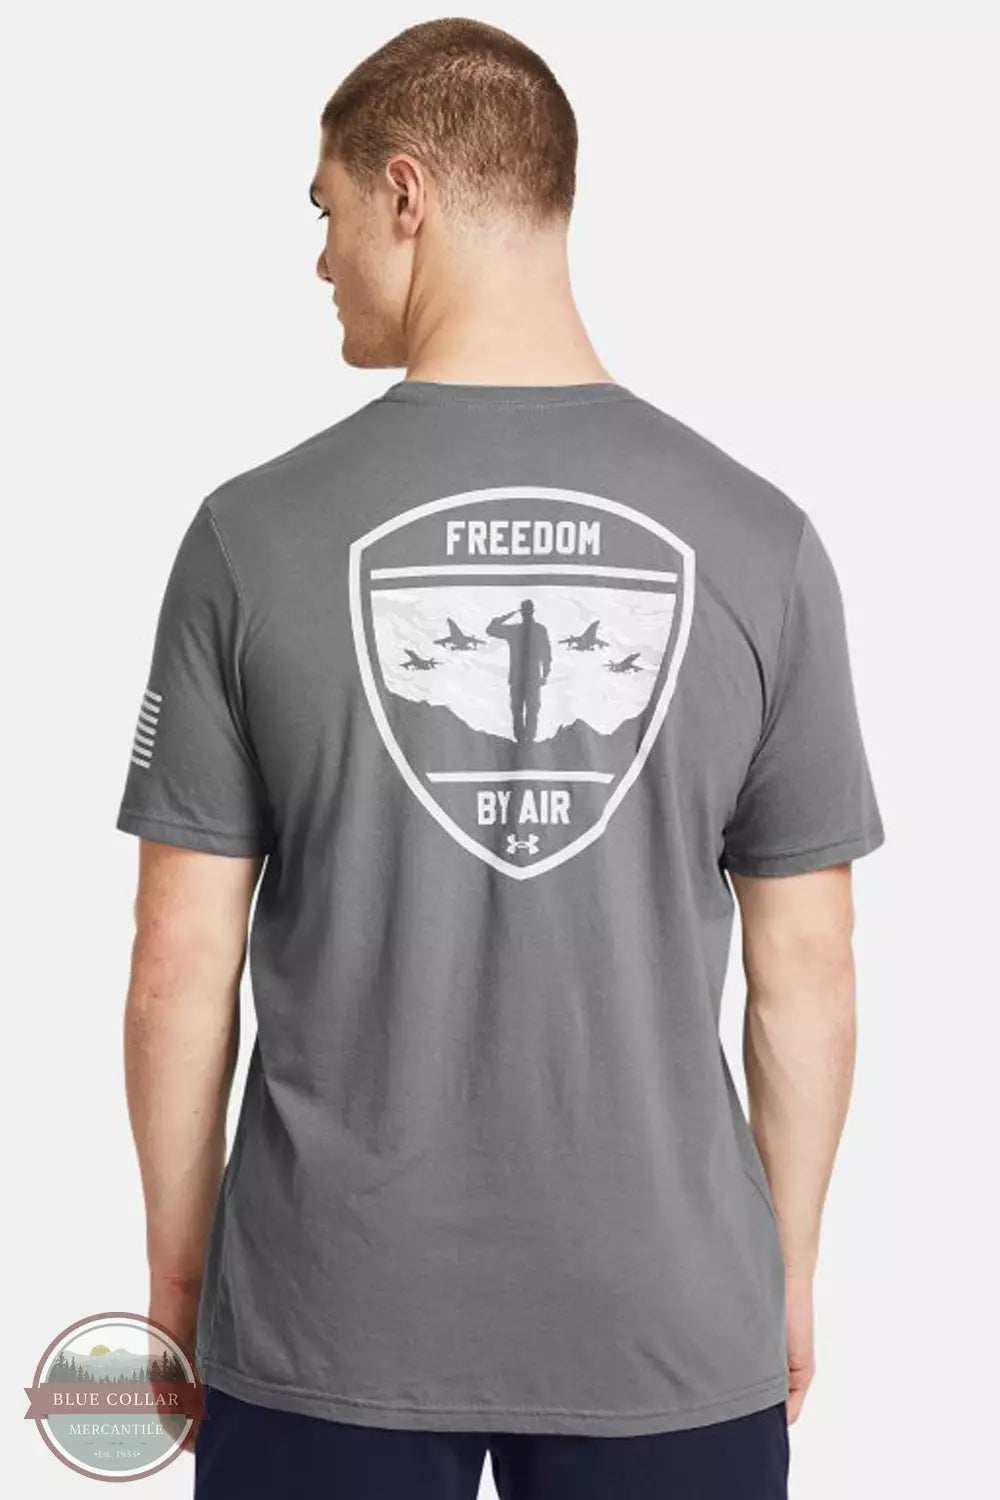 Under Armour 1385948-024 Freedom By Air Short Sleeve T-Shirt in Titan Gray Back View